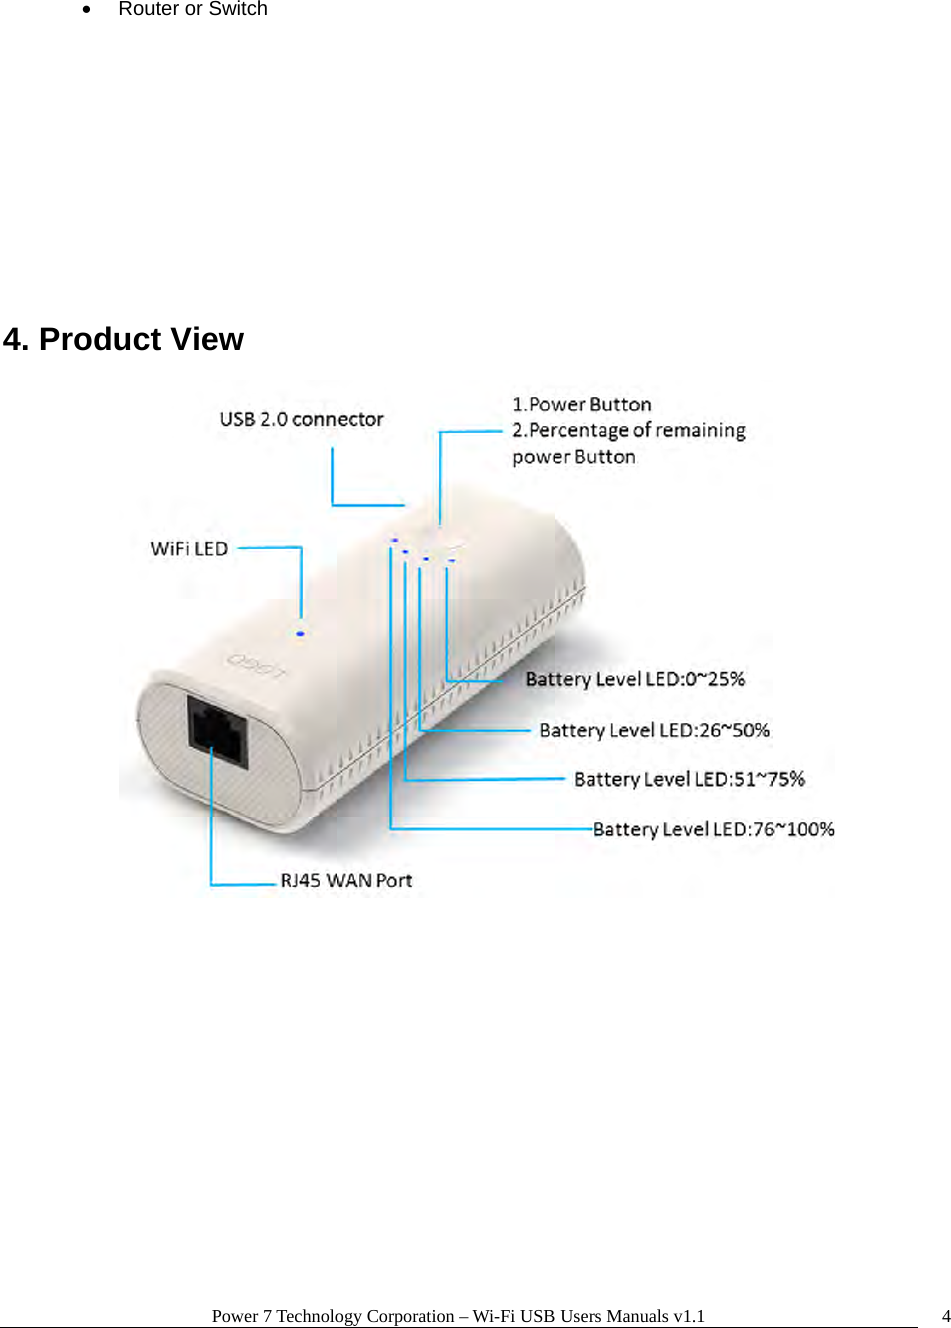 Power 7 Technology Corporation – Wi-Fi USB Users Manuals v1.1  4  Router or Switch          4. Product View  